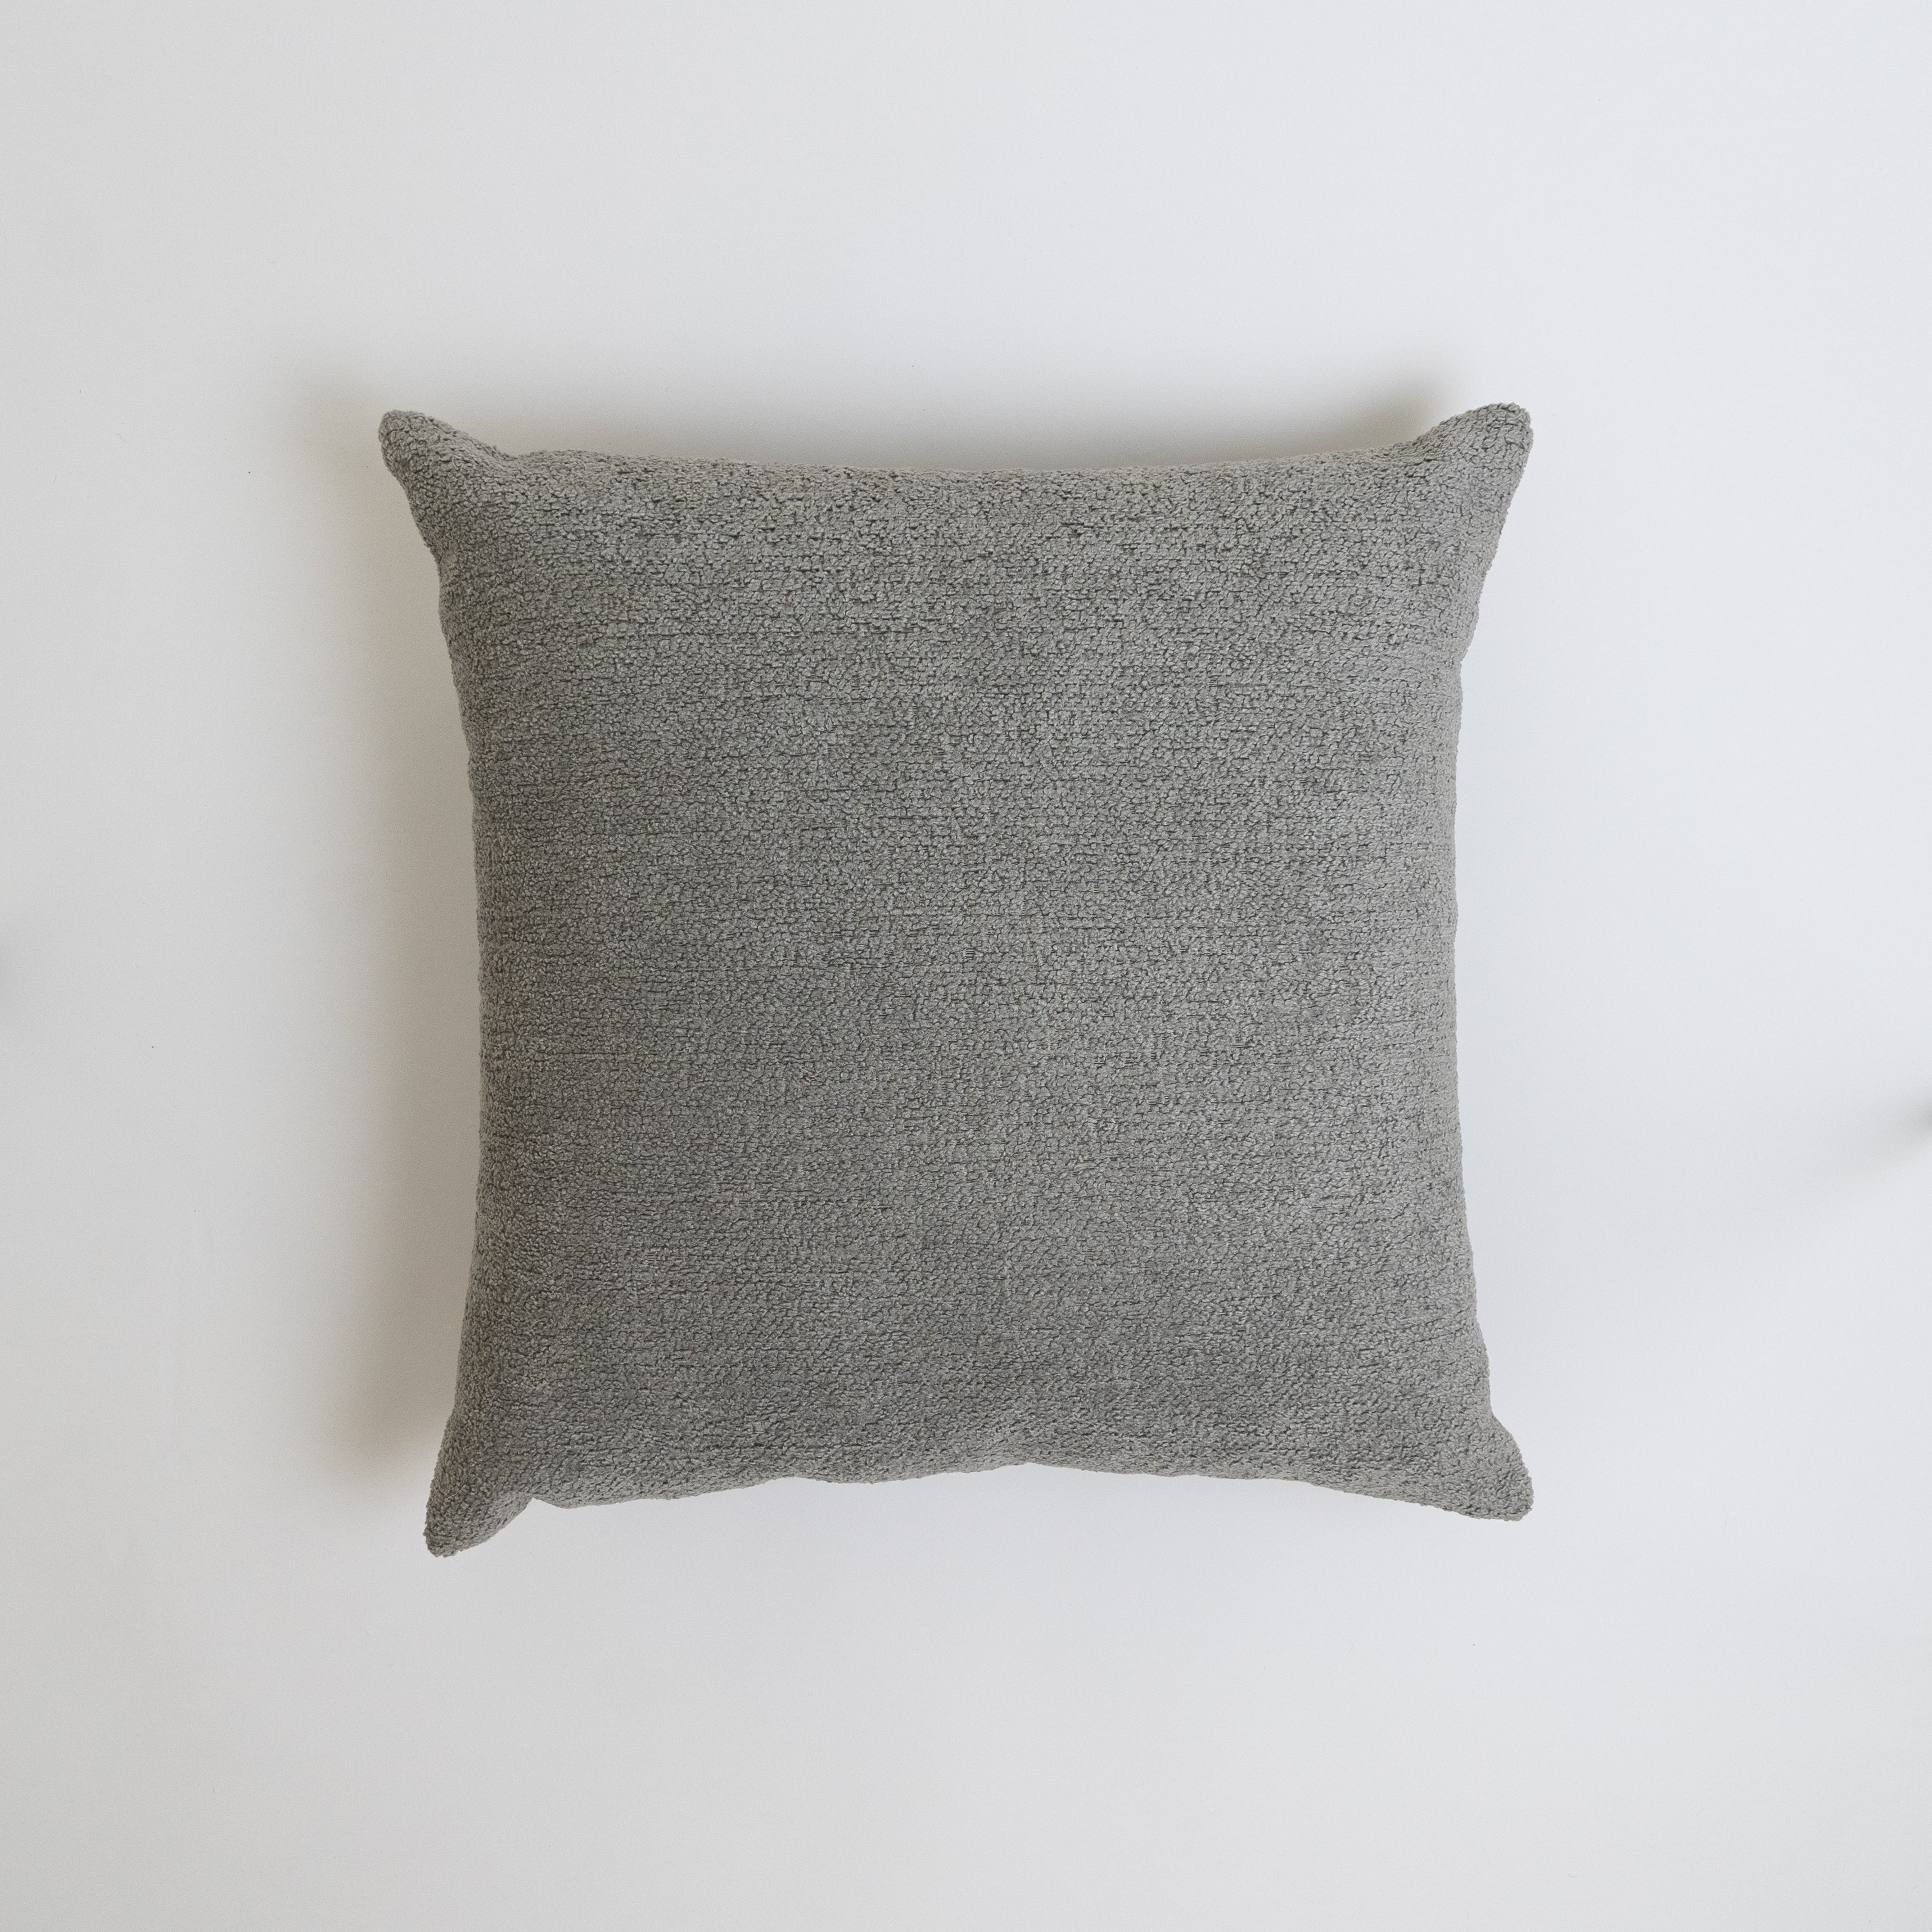 Cushion Cover 60 x 60cm - Wood and Steel Furnitures